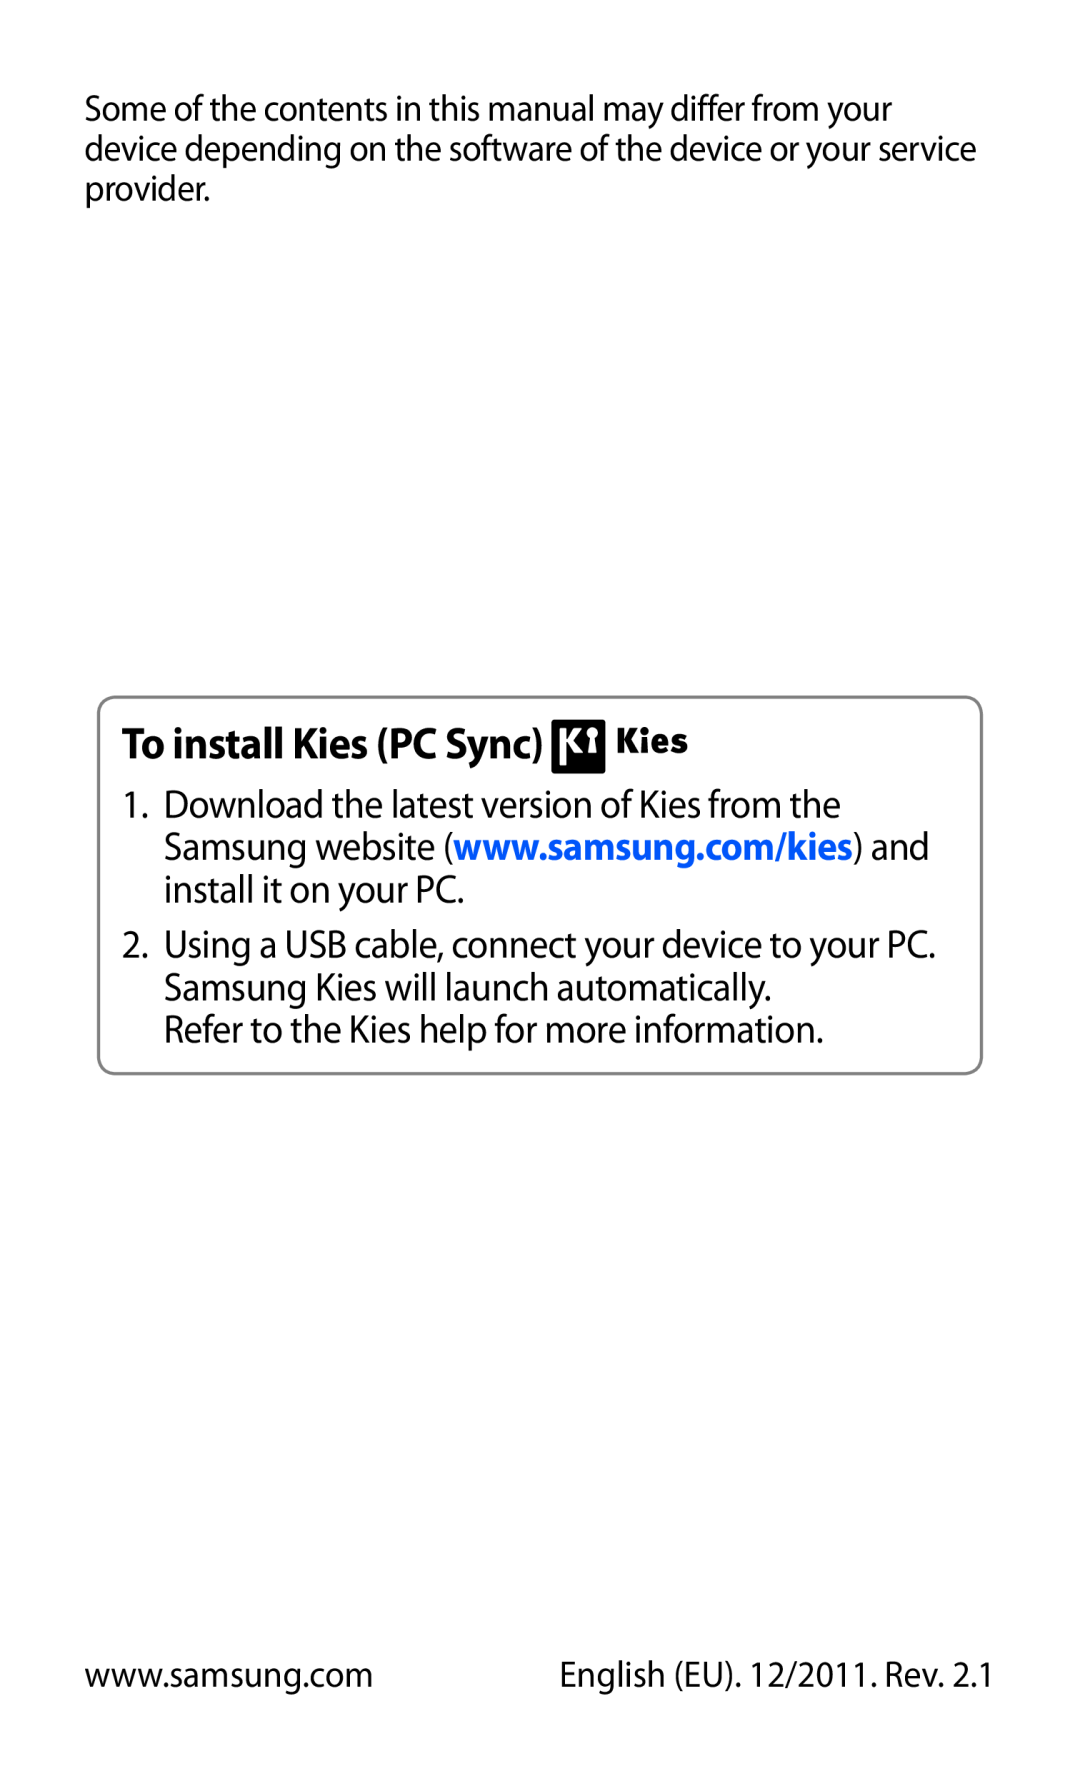 Samsung GT-P7310FKAXEZ, GT-P7310FKEXEF, GT-P7310UWEXEF To install Kies PC Sync, Refer to the Kies help for more information 